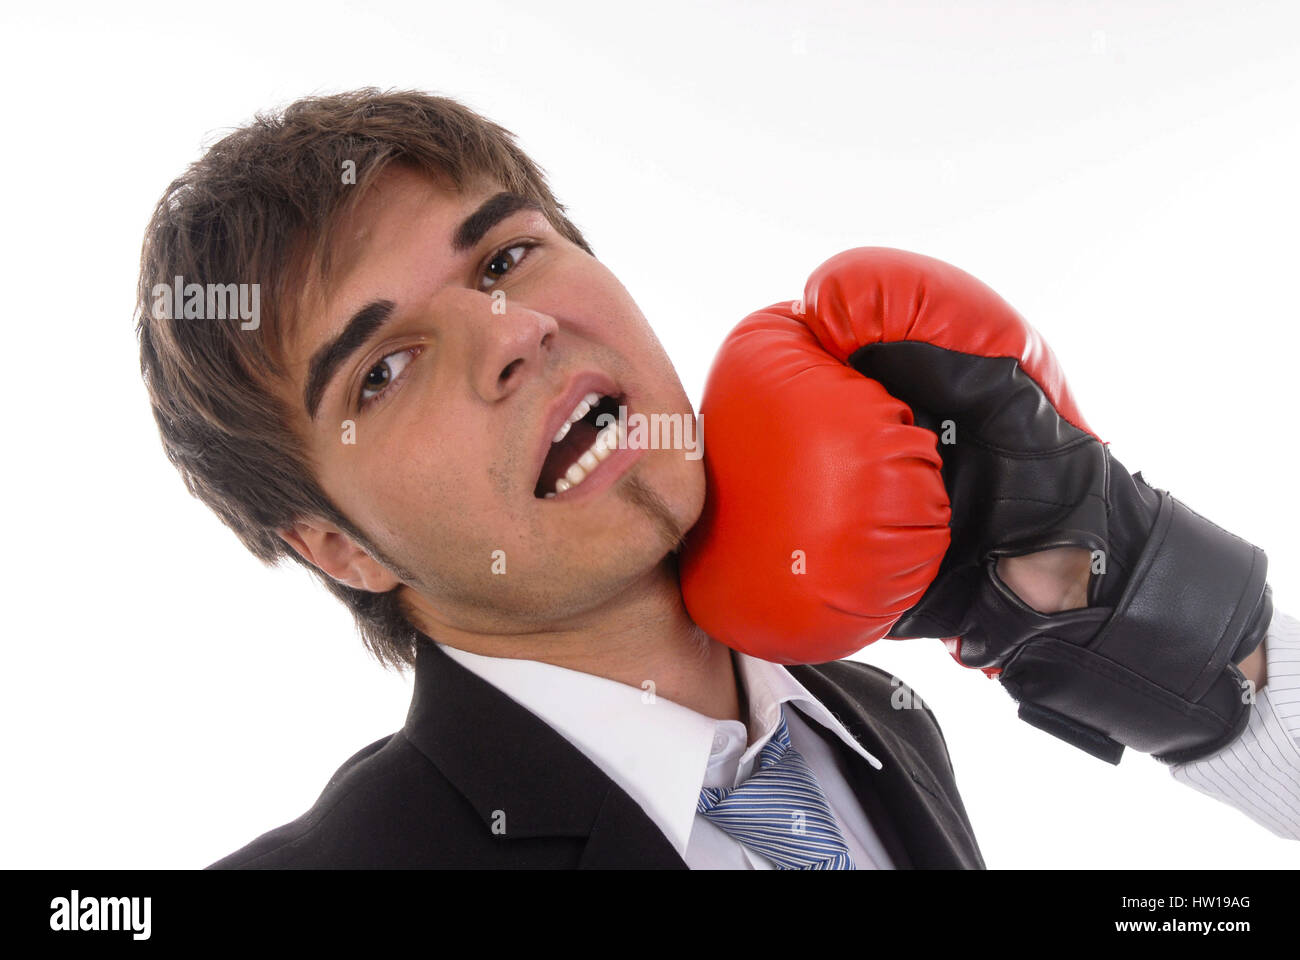 Grievedly, Getroffen Stock Photo